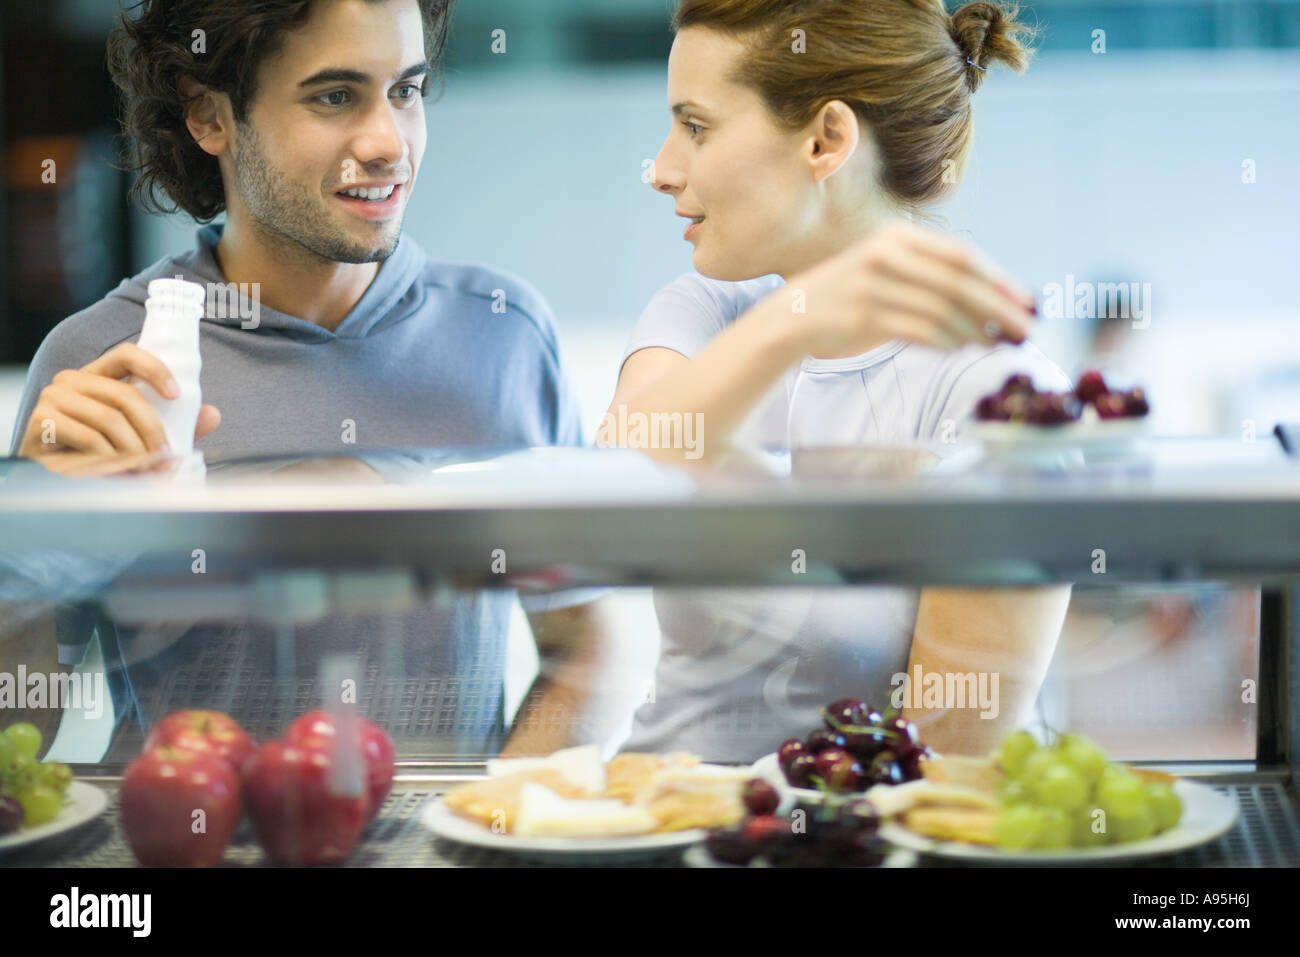 Two young adults standing at snackbar, chatting Stock Photo